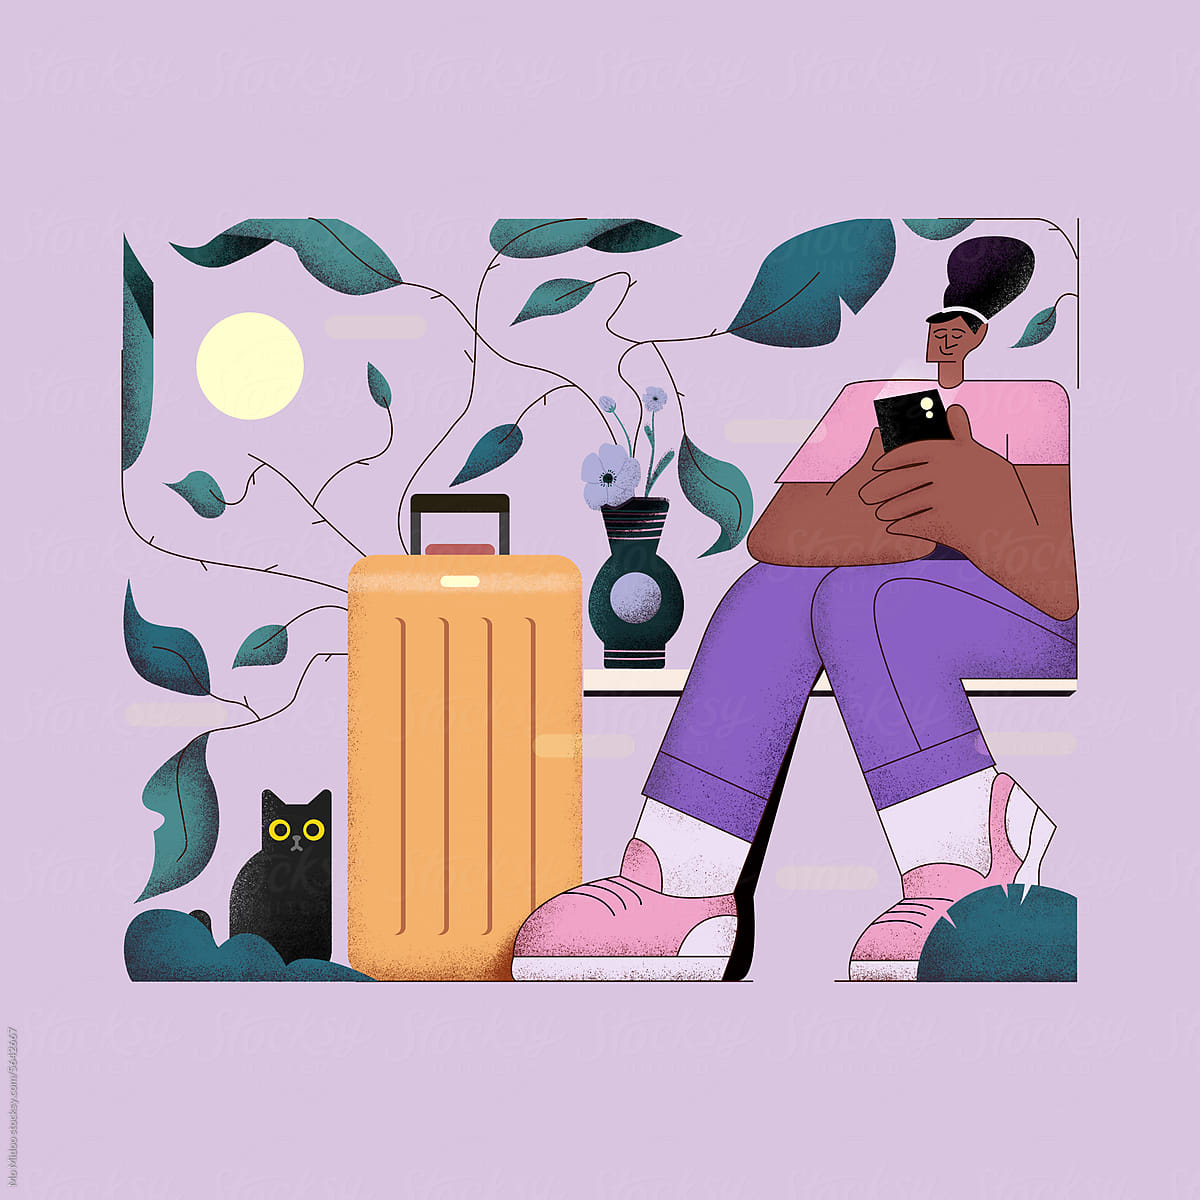 illustration of a woman sitting on a bench with a suitcase next to her